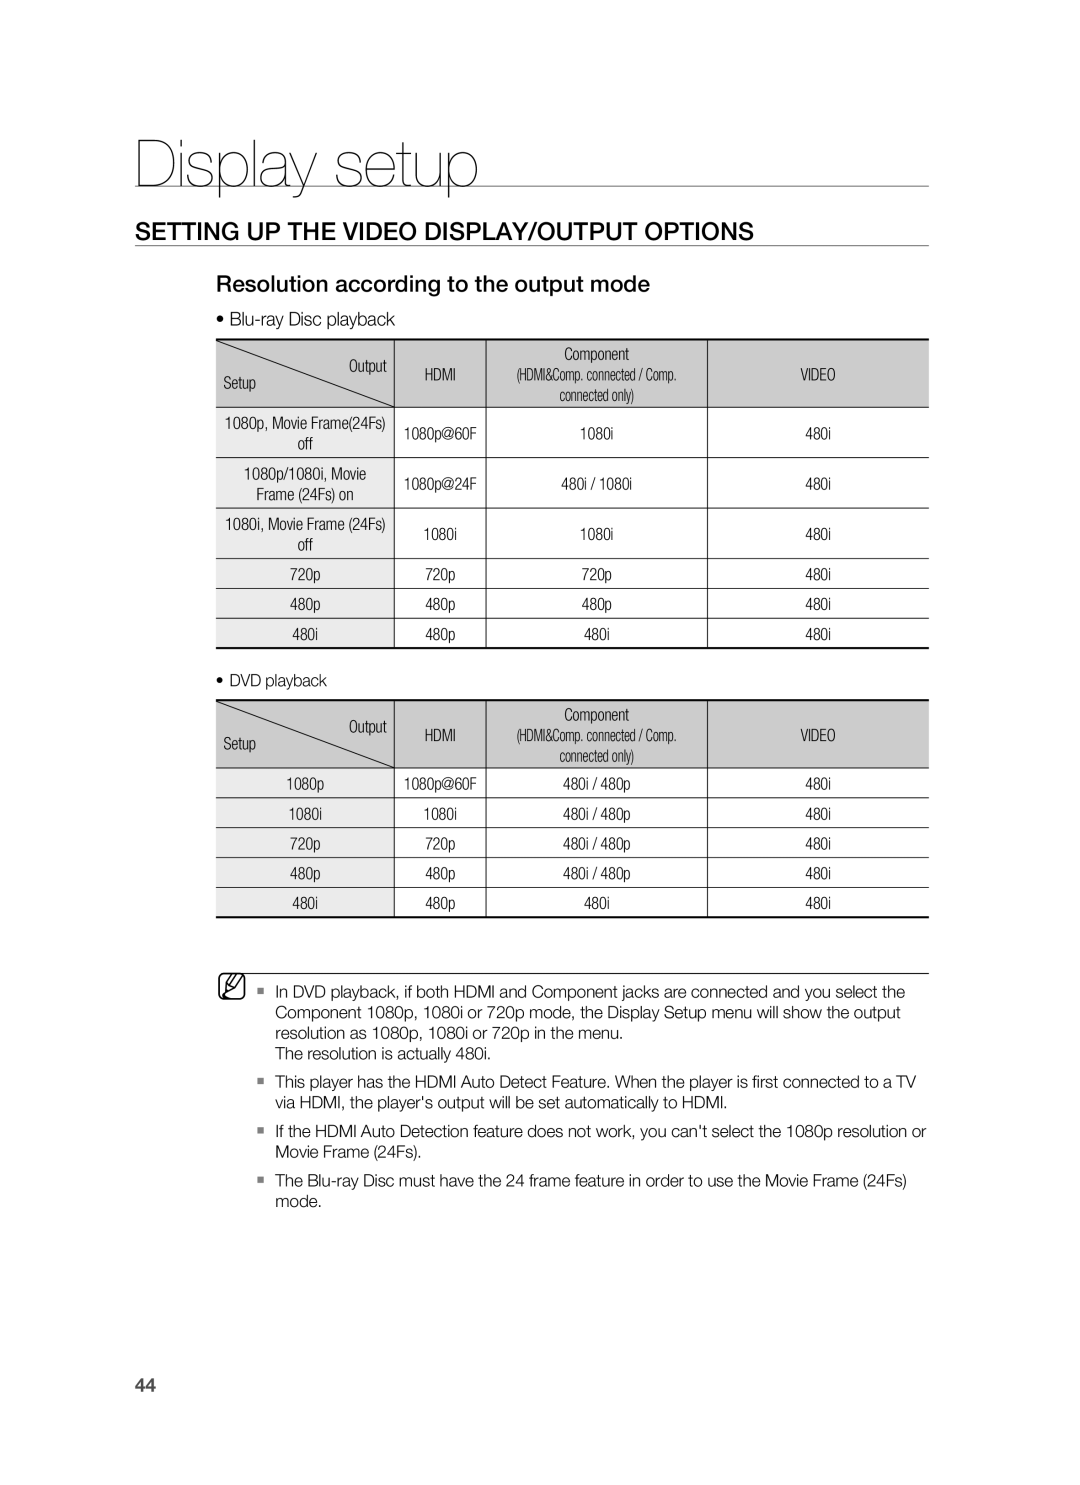 Samsung AH68-02178Z Setting Up The Video Display/Output Options, Resolution according to the output mode, Display setup 